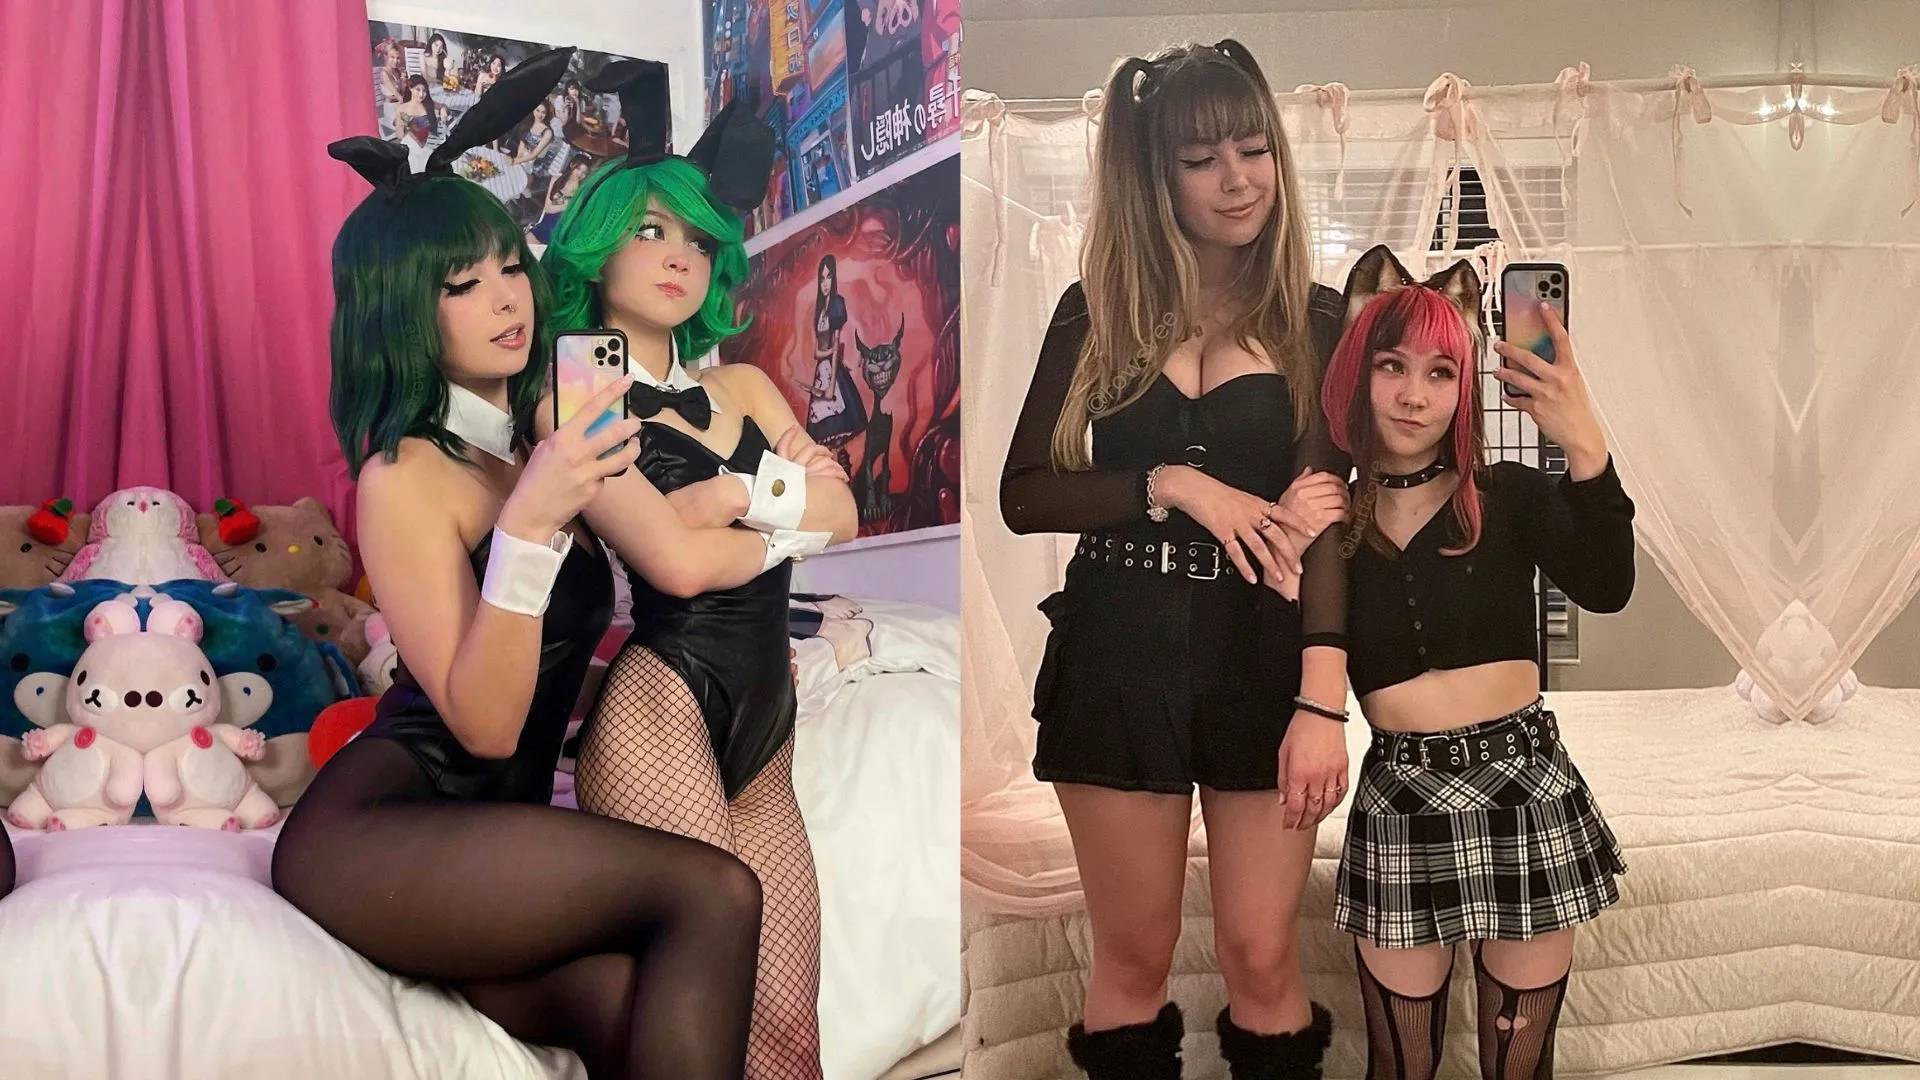 Tatsumaki Cosplayer Criticized For “Child-Like Appearance” In Sexualised Photo